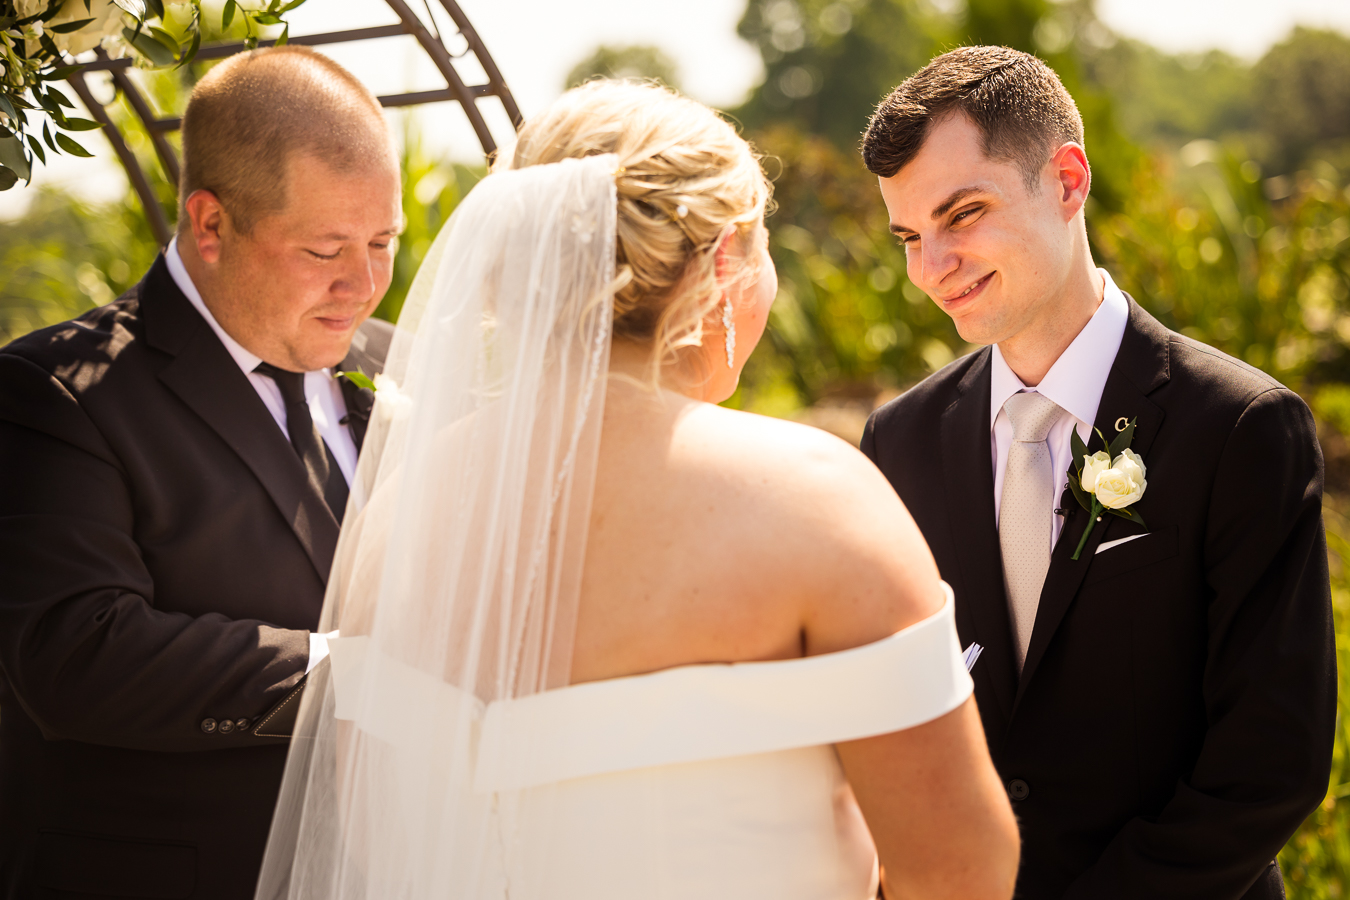 Creative wedding photographer, lisa rhinehart, captures this authentic image of the groom smiling at his bride during their wedding ceremony in Virginia 